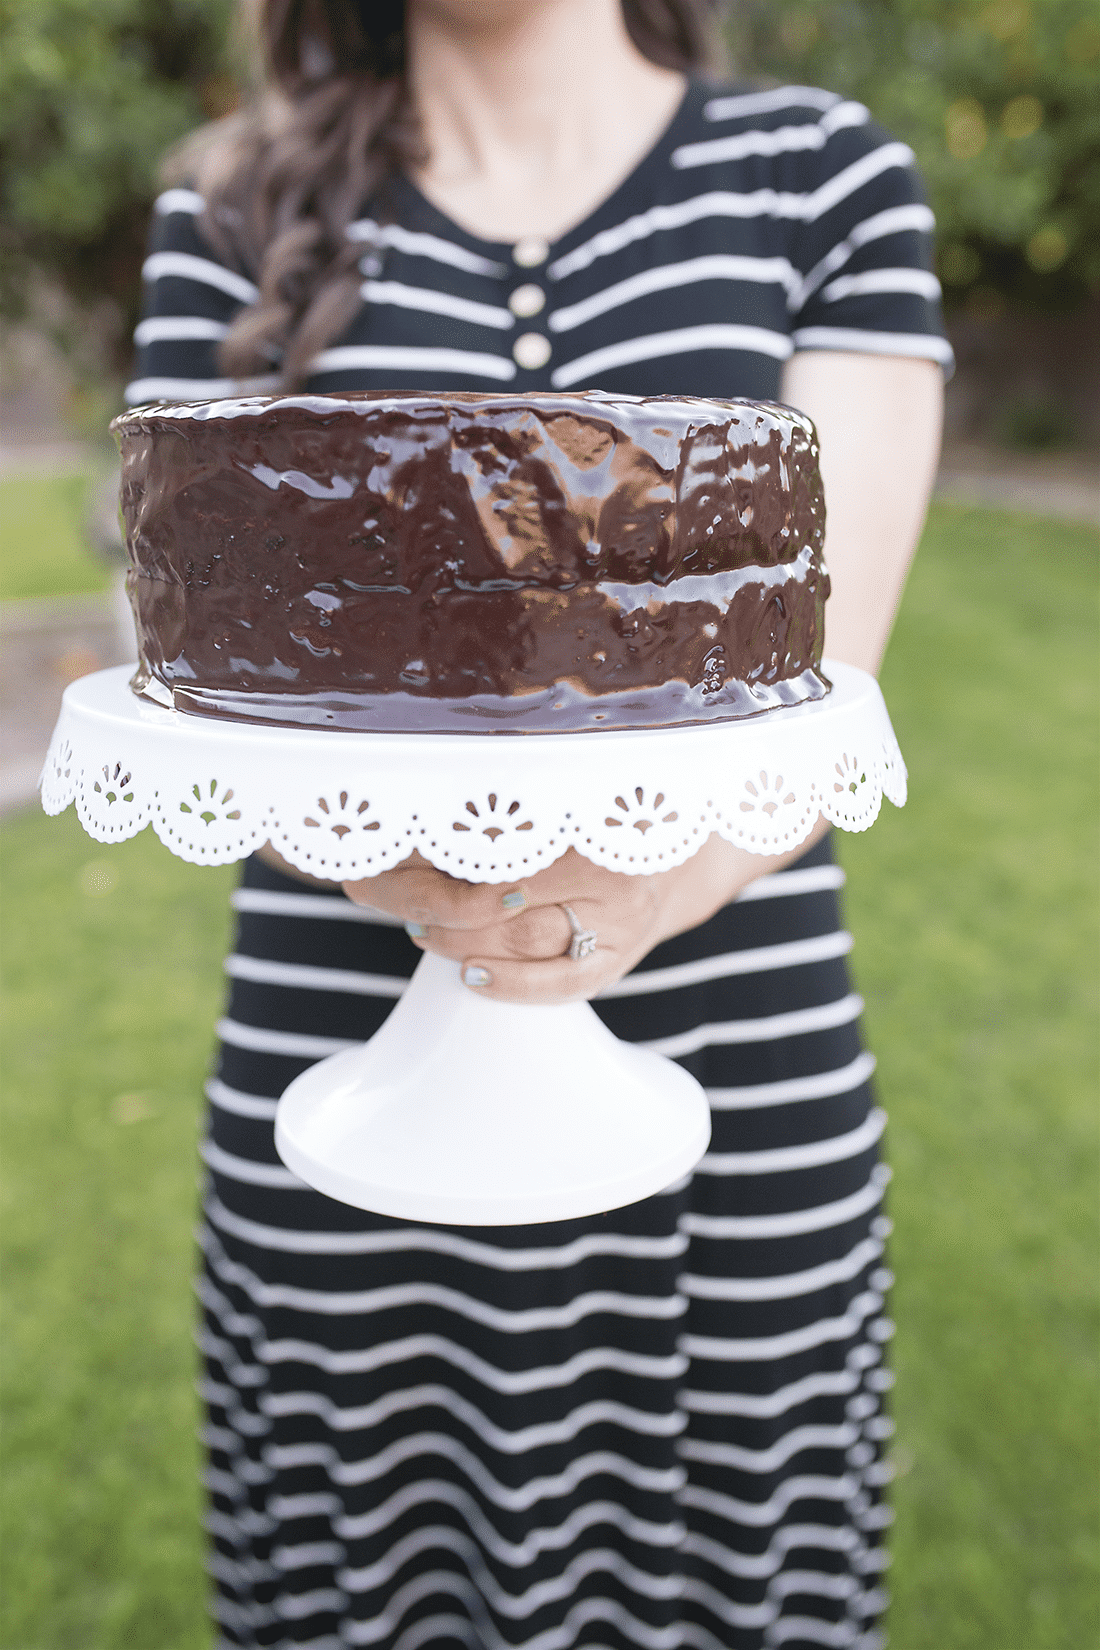 The best chocolate cake recipe: death by chocolate cake with old fashioned gourmet ingredients and a ganache frosting you'll never forget!